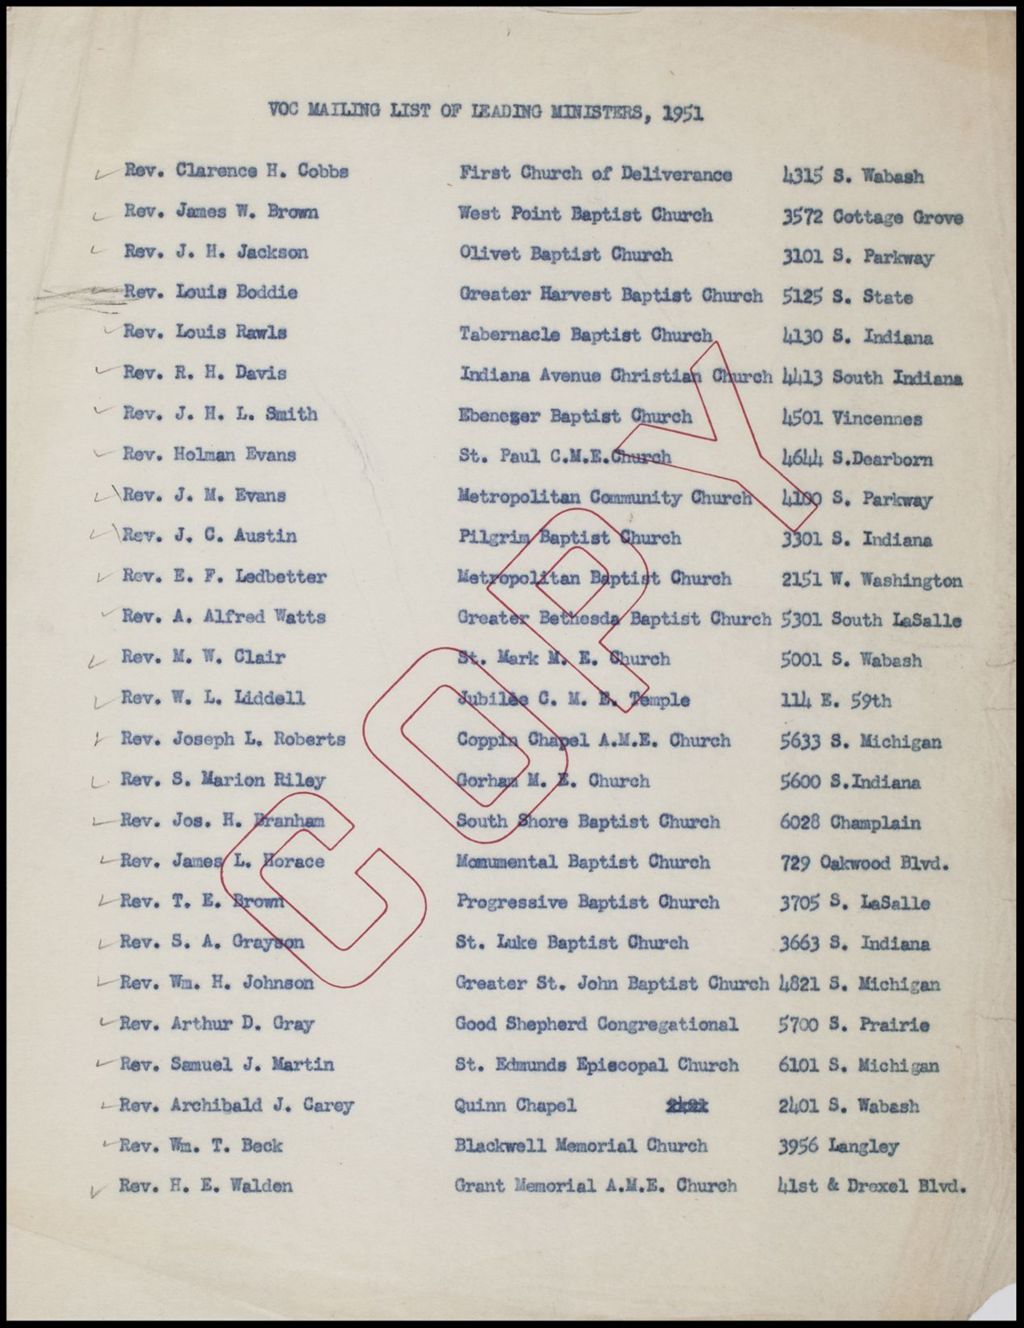 Miniature of Ministers and Churches - Lists, 1951 (Folder II-2318)